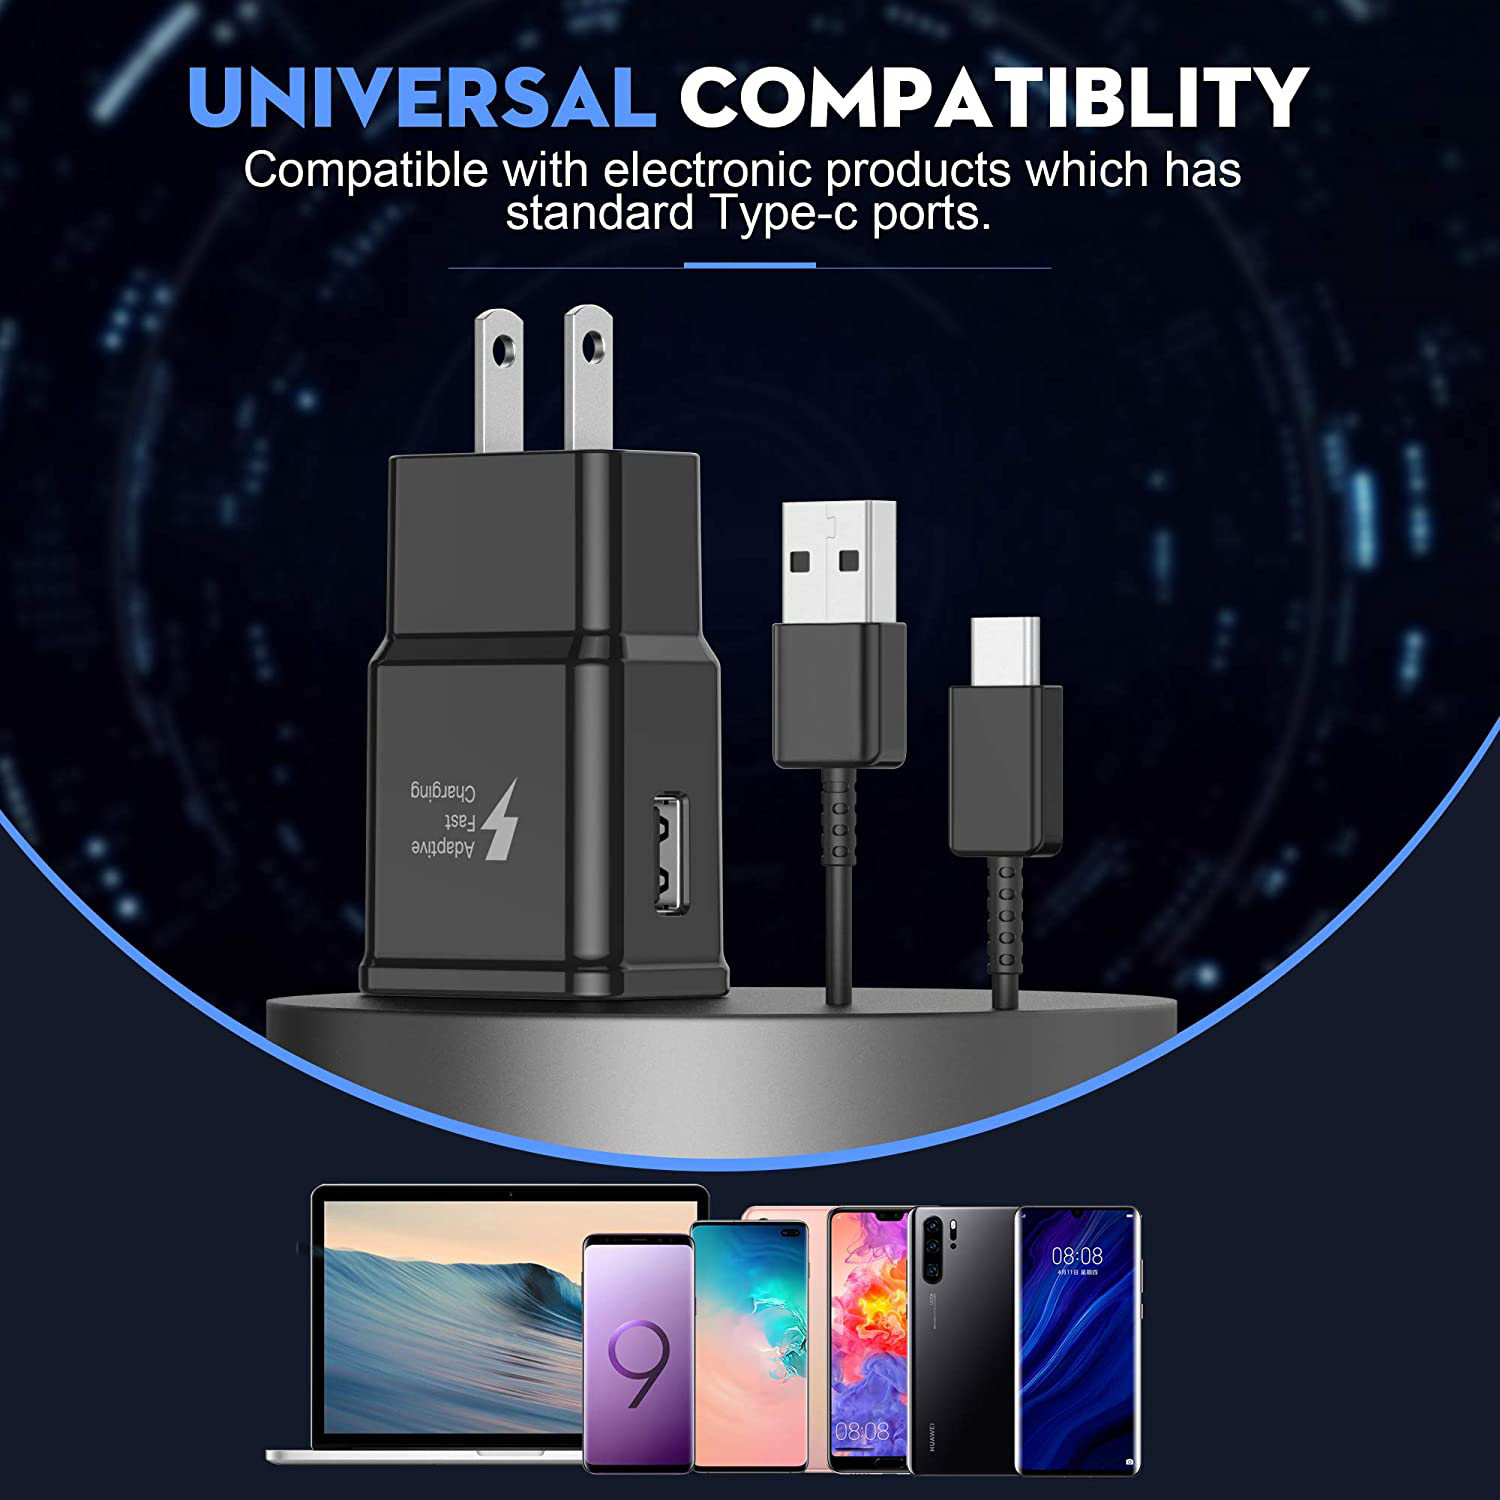 Fast USB Wall Charger Cable 4 Feet USB-C Type-C 3.1 Data Sync Charger Cable Cord For Samsung Galaxy S10 S9 S9+ Galaxy S8 S8 Plus Nexus 5X 6P OnePlus 2 3 LG G5 G6 V20 HTC M10 Google Pixel XL - image 4 of 5